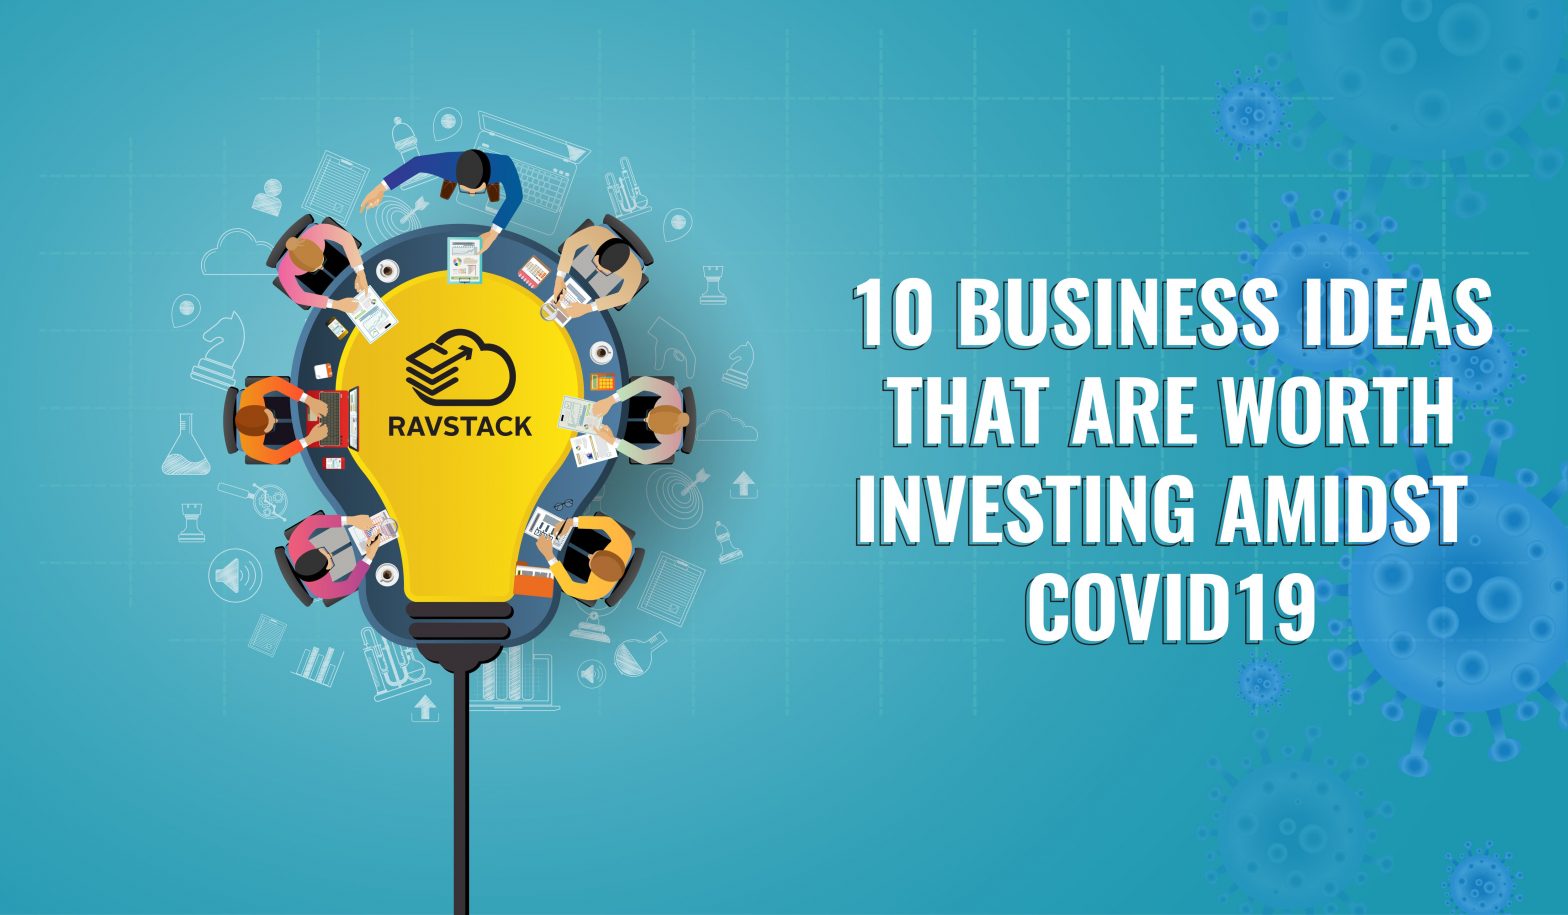 10 Business ideas that are worth investing amidst COVID19